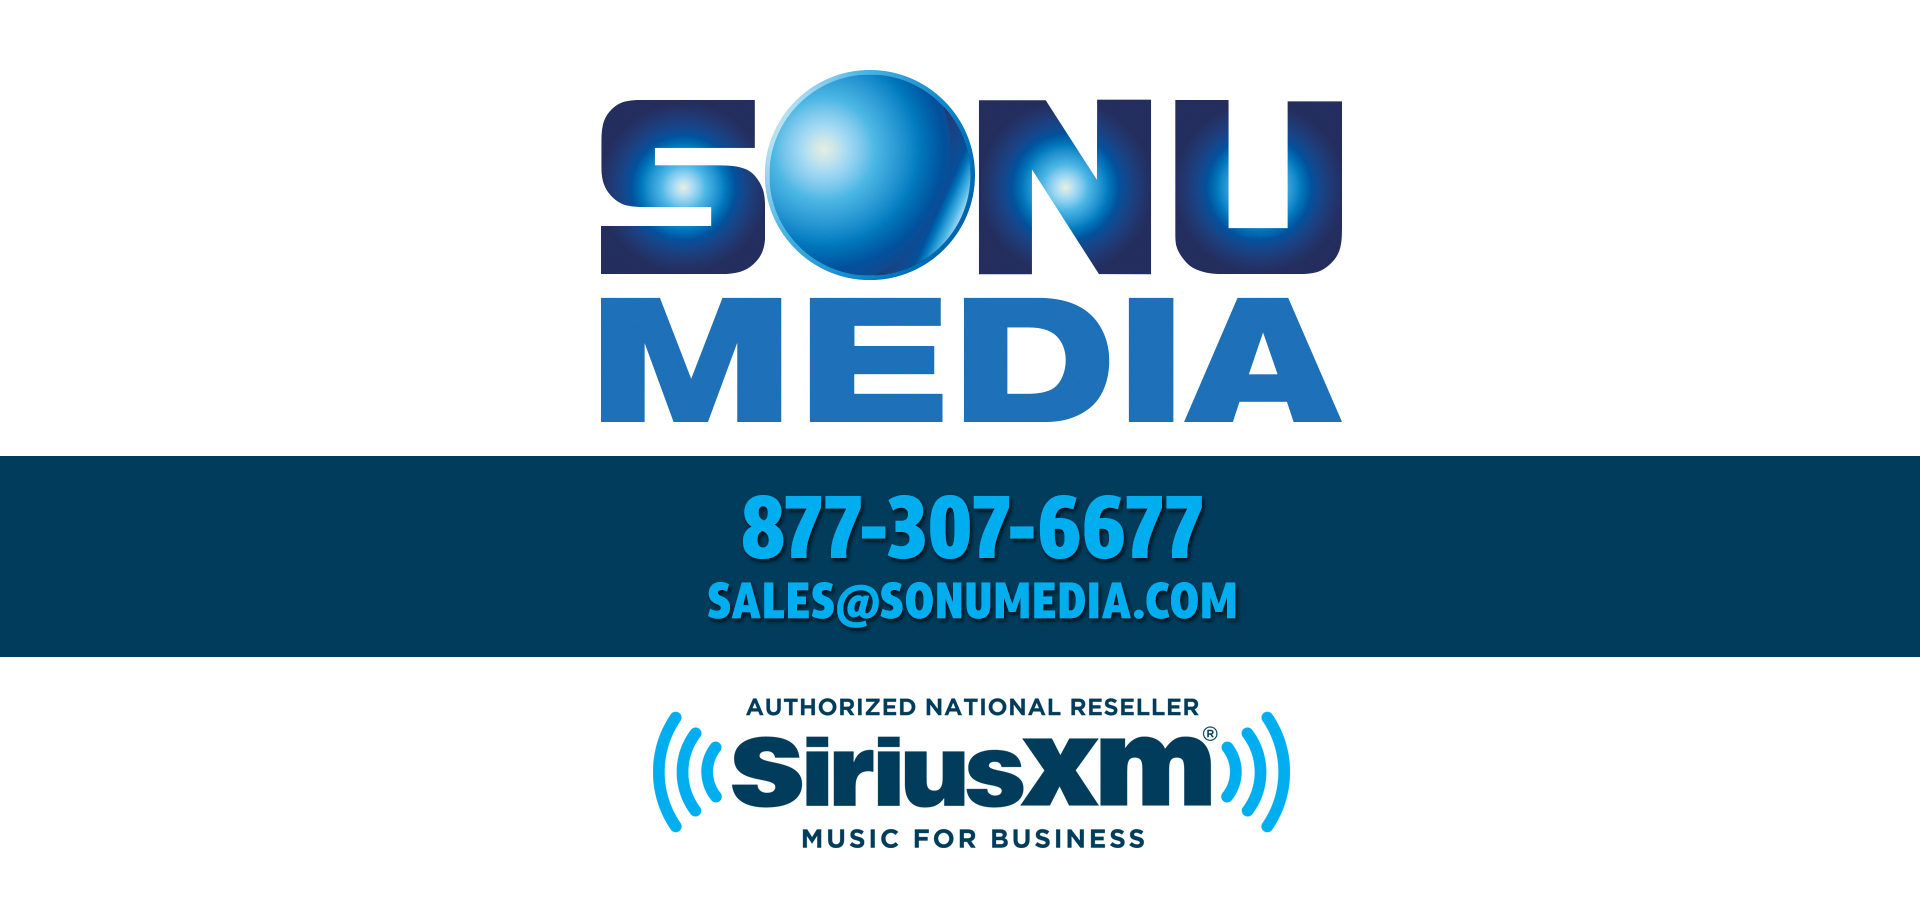 SiriusXM for Business Web Portal Music for Business 877-307-6677.